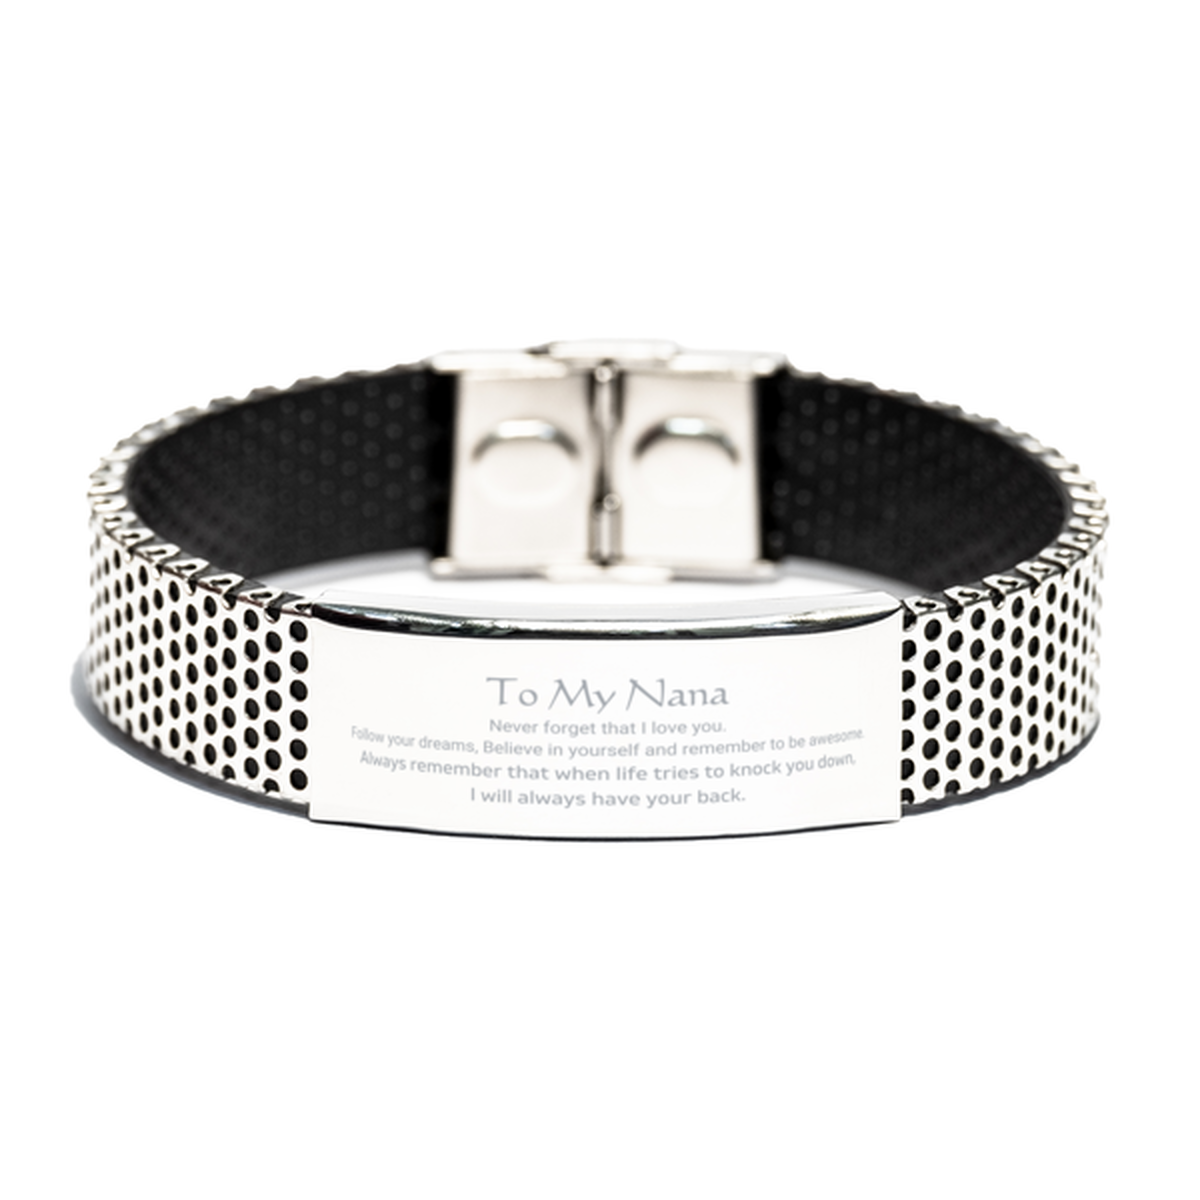 Inspirational Gifts for Nana, Follow your dreams, Believe in yourself, Nana Stainless Steel Bracelet, Birthday Christmas Unique Gifts For Nana